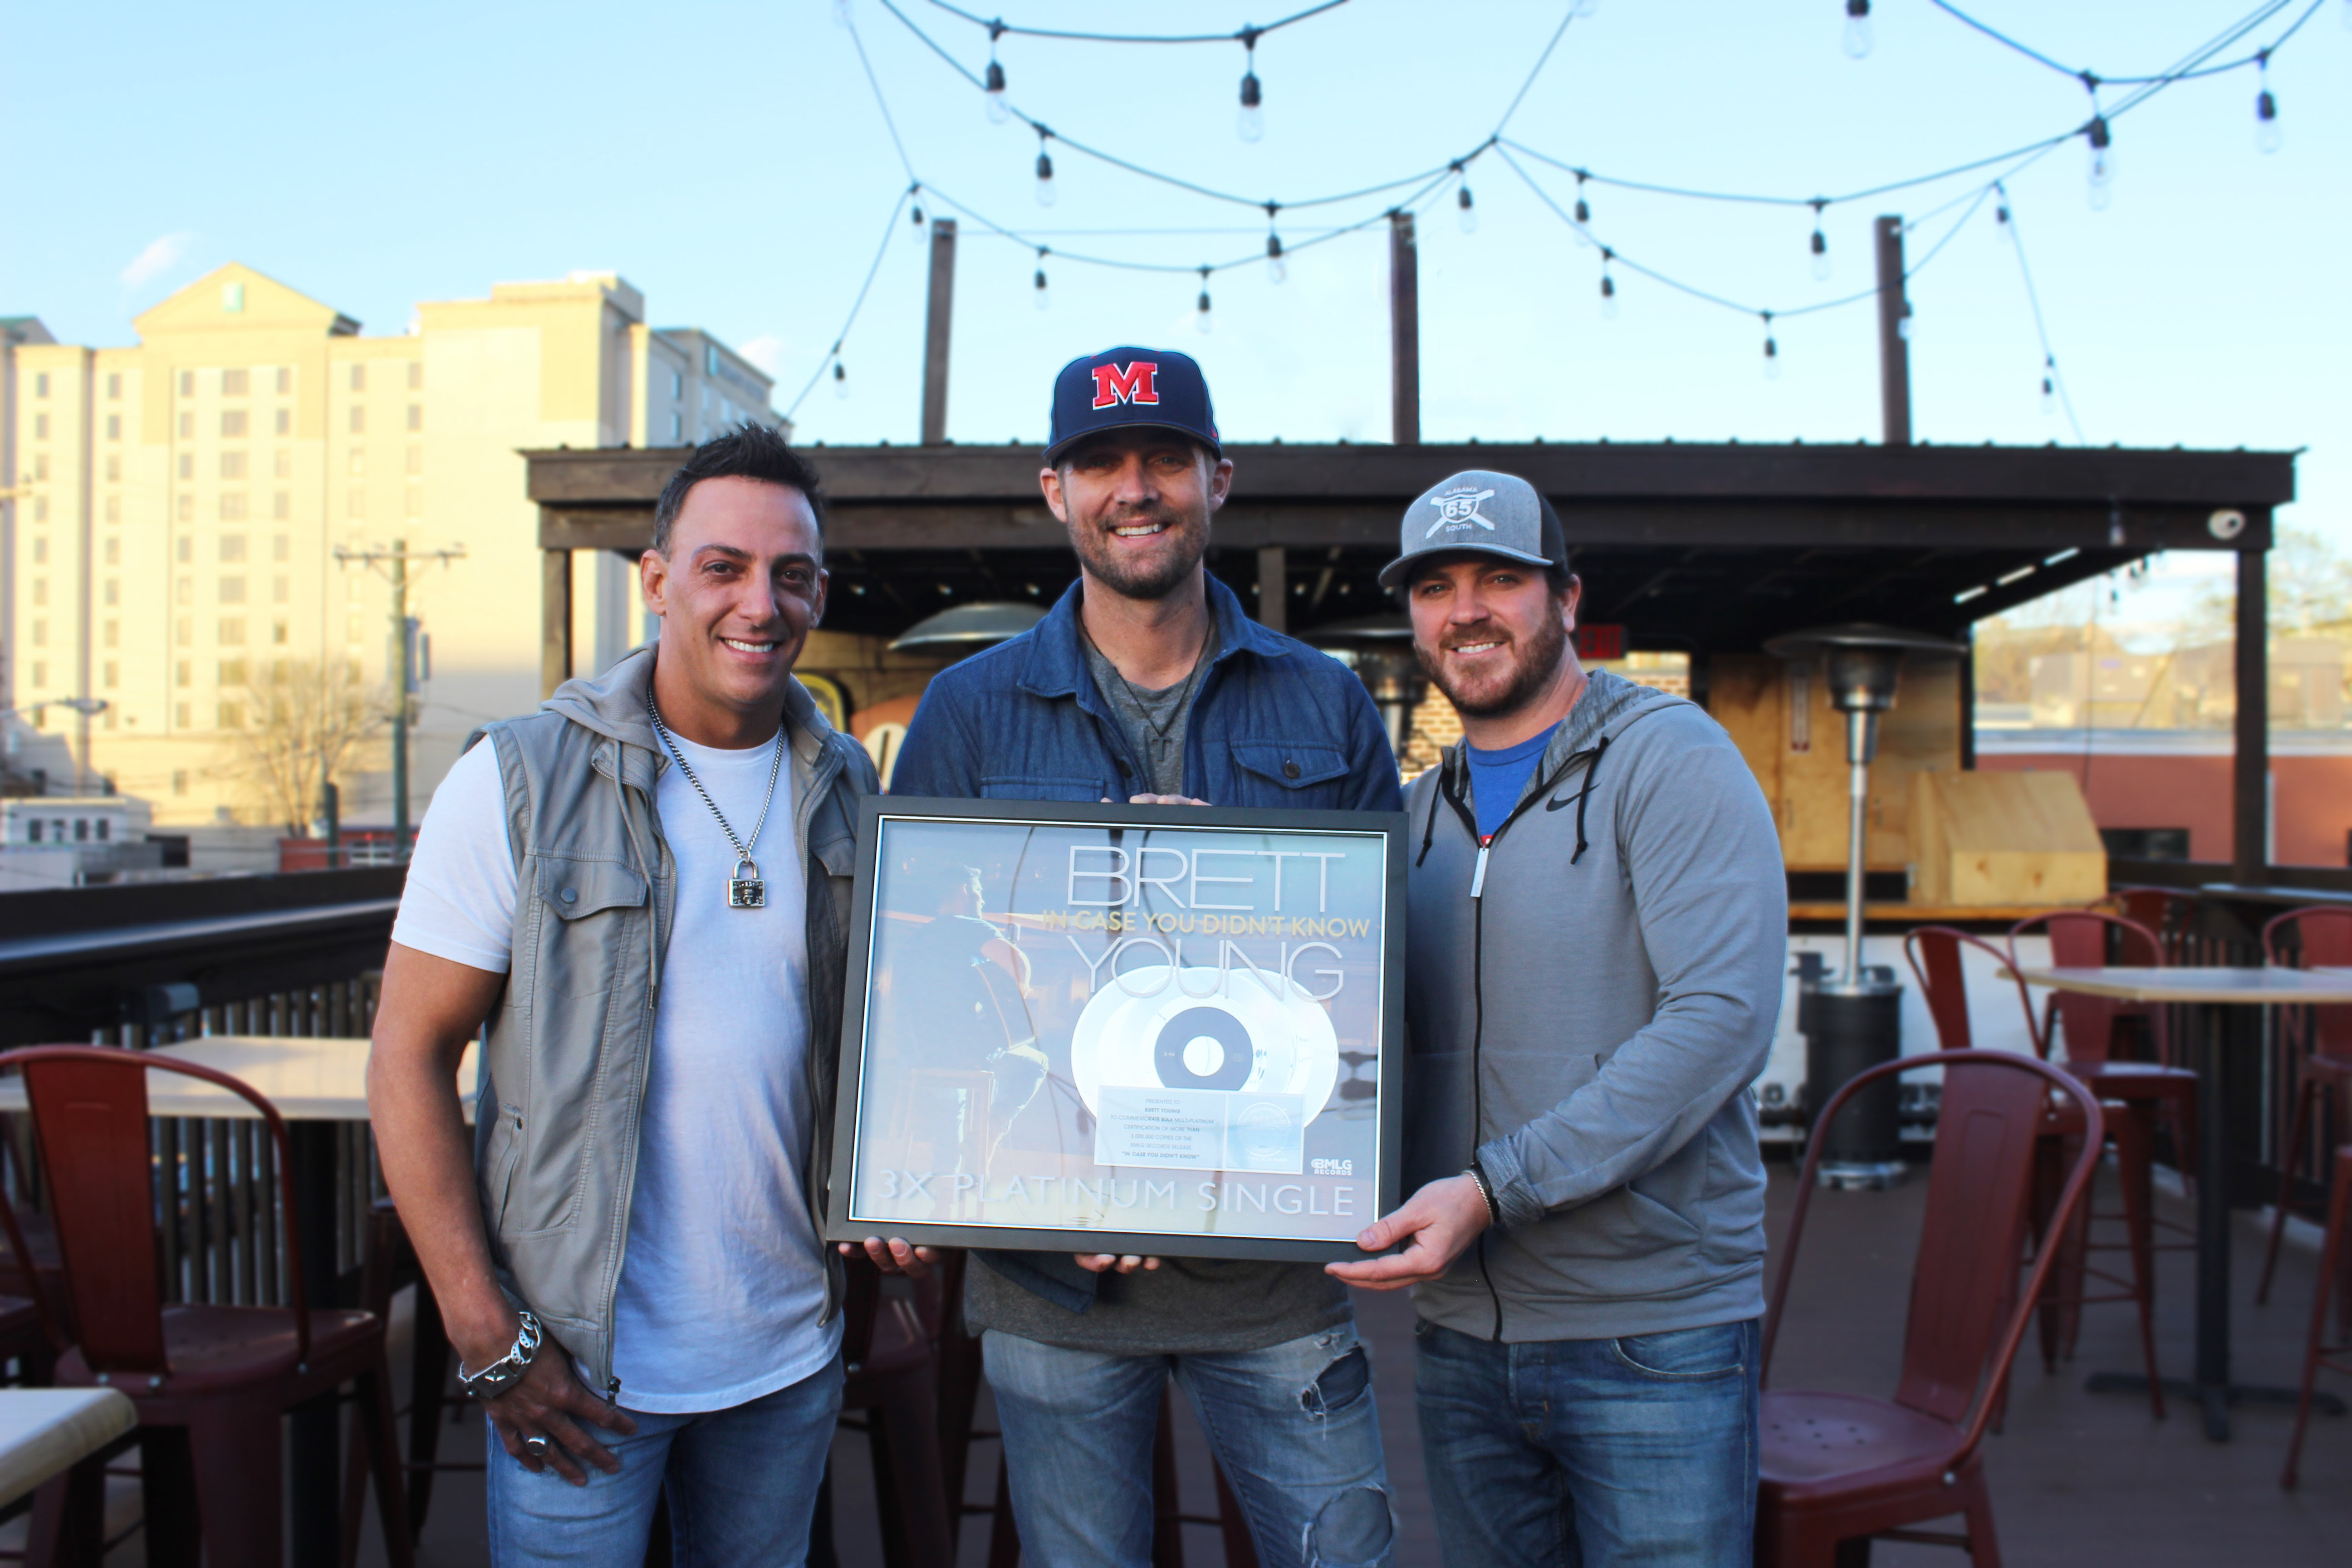 Brett Young’s “In Case You Didn’t Know” is Now 3X PLATINUM!